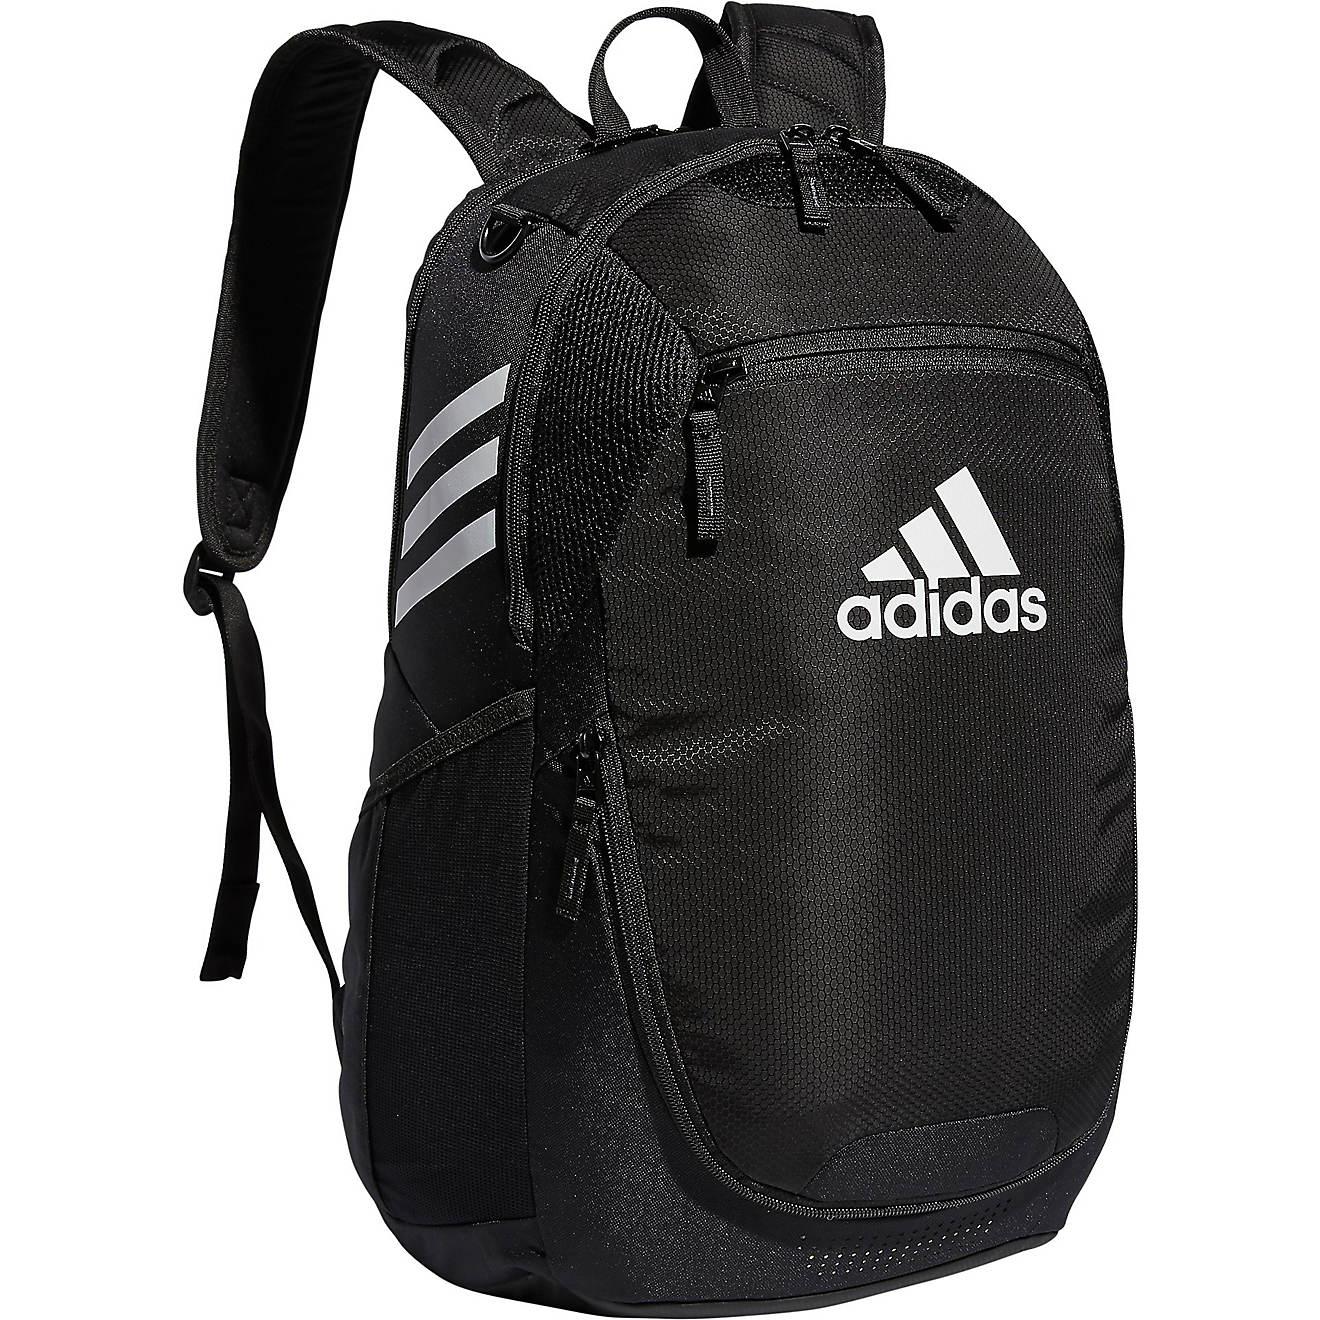 adidas Stadium Soccer Backpack                                                                                                   - view number 1